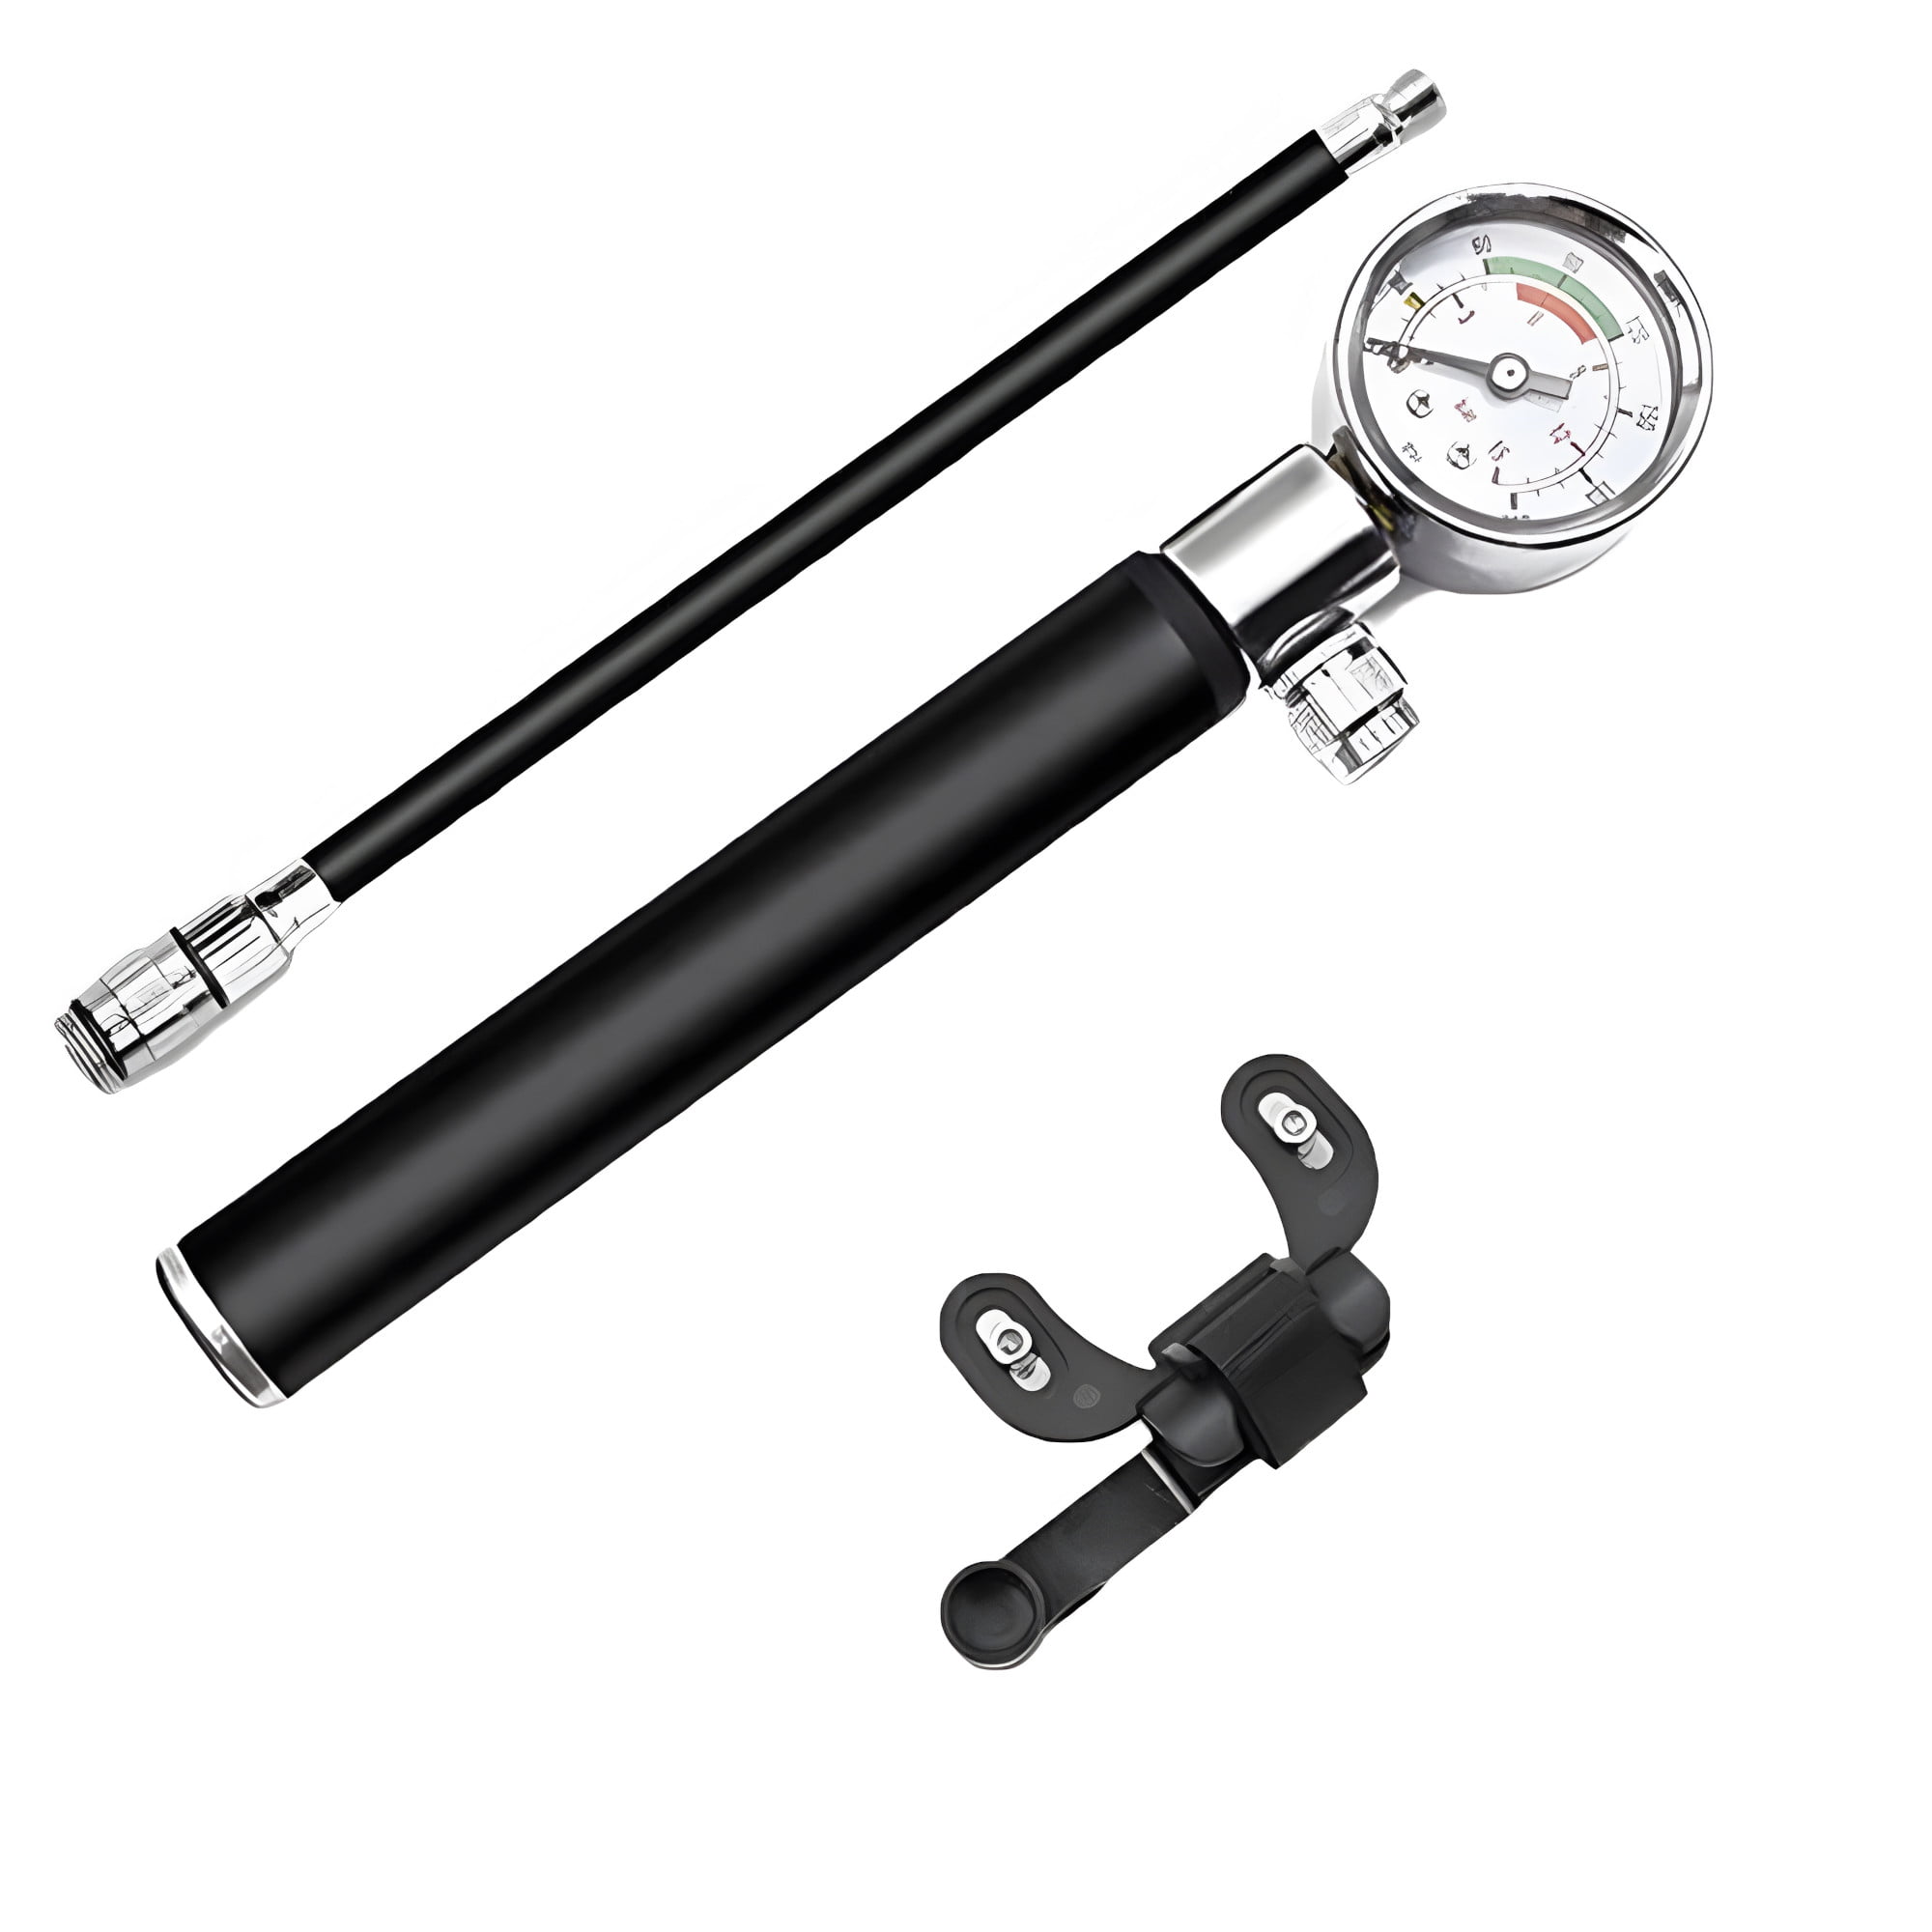 Pump for electric scooter with gauge and extension